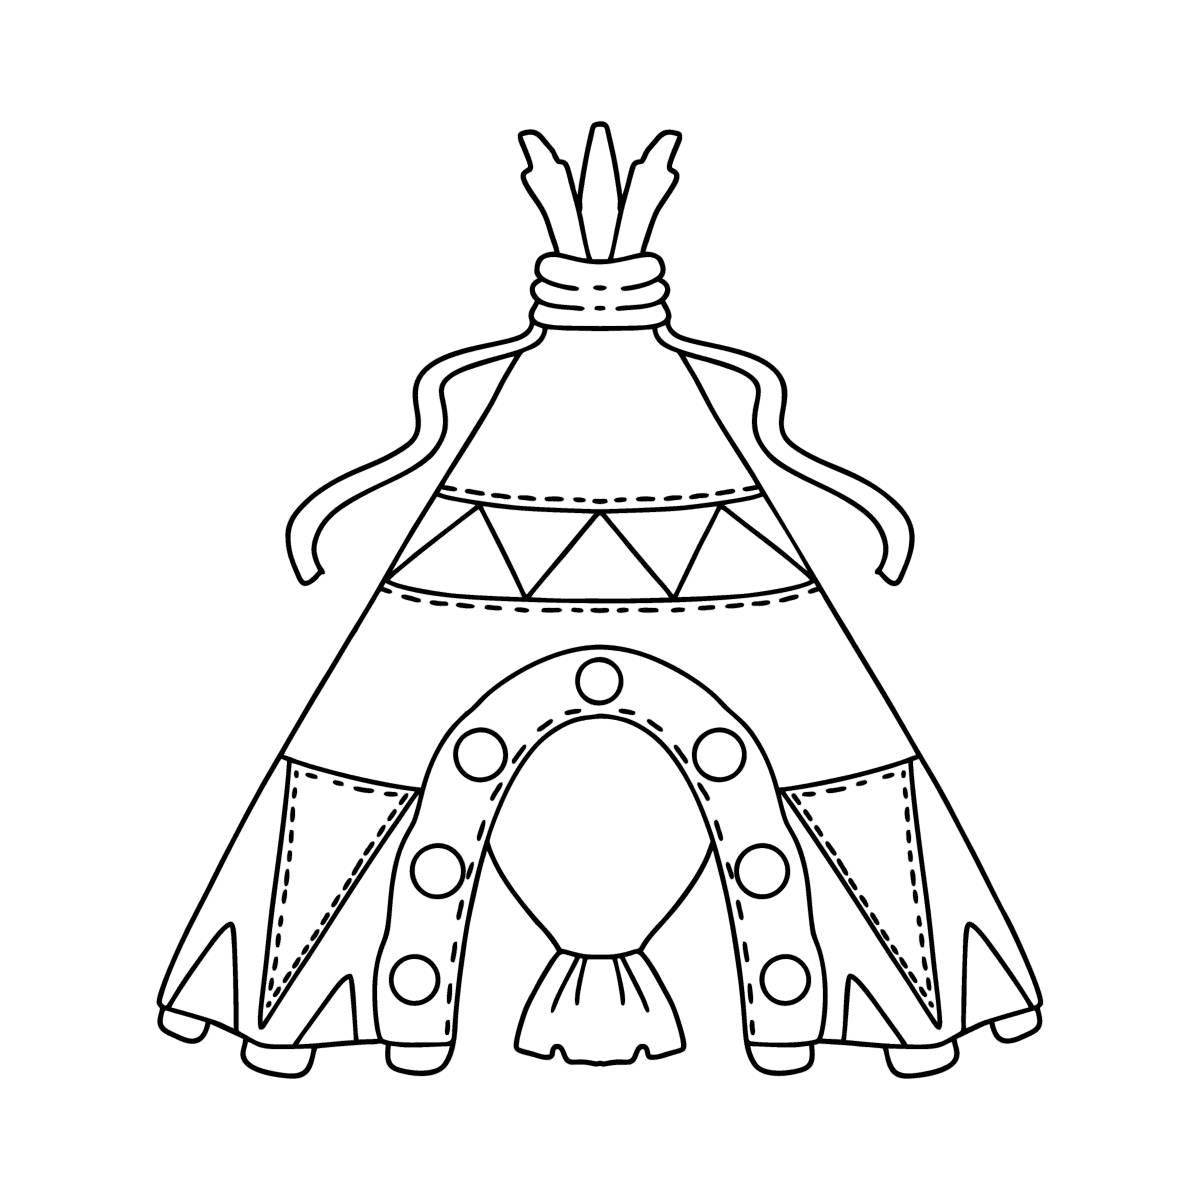 Glowing wigwam coloring page